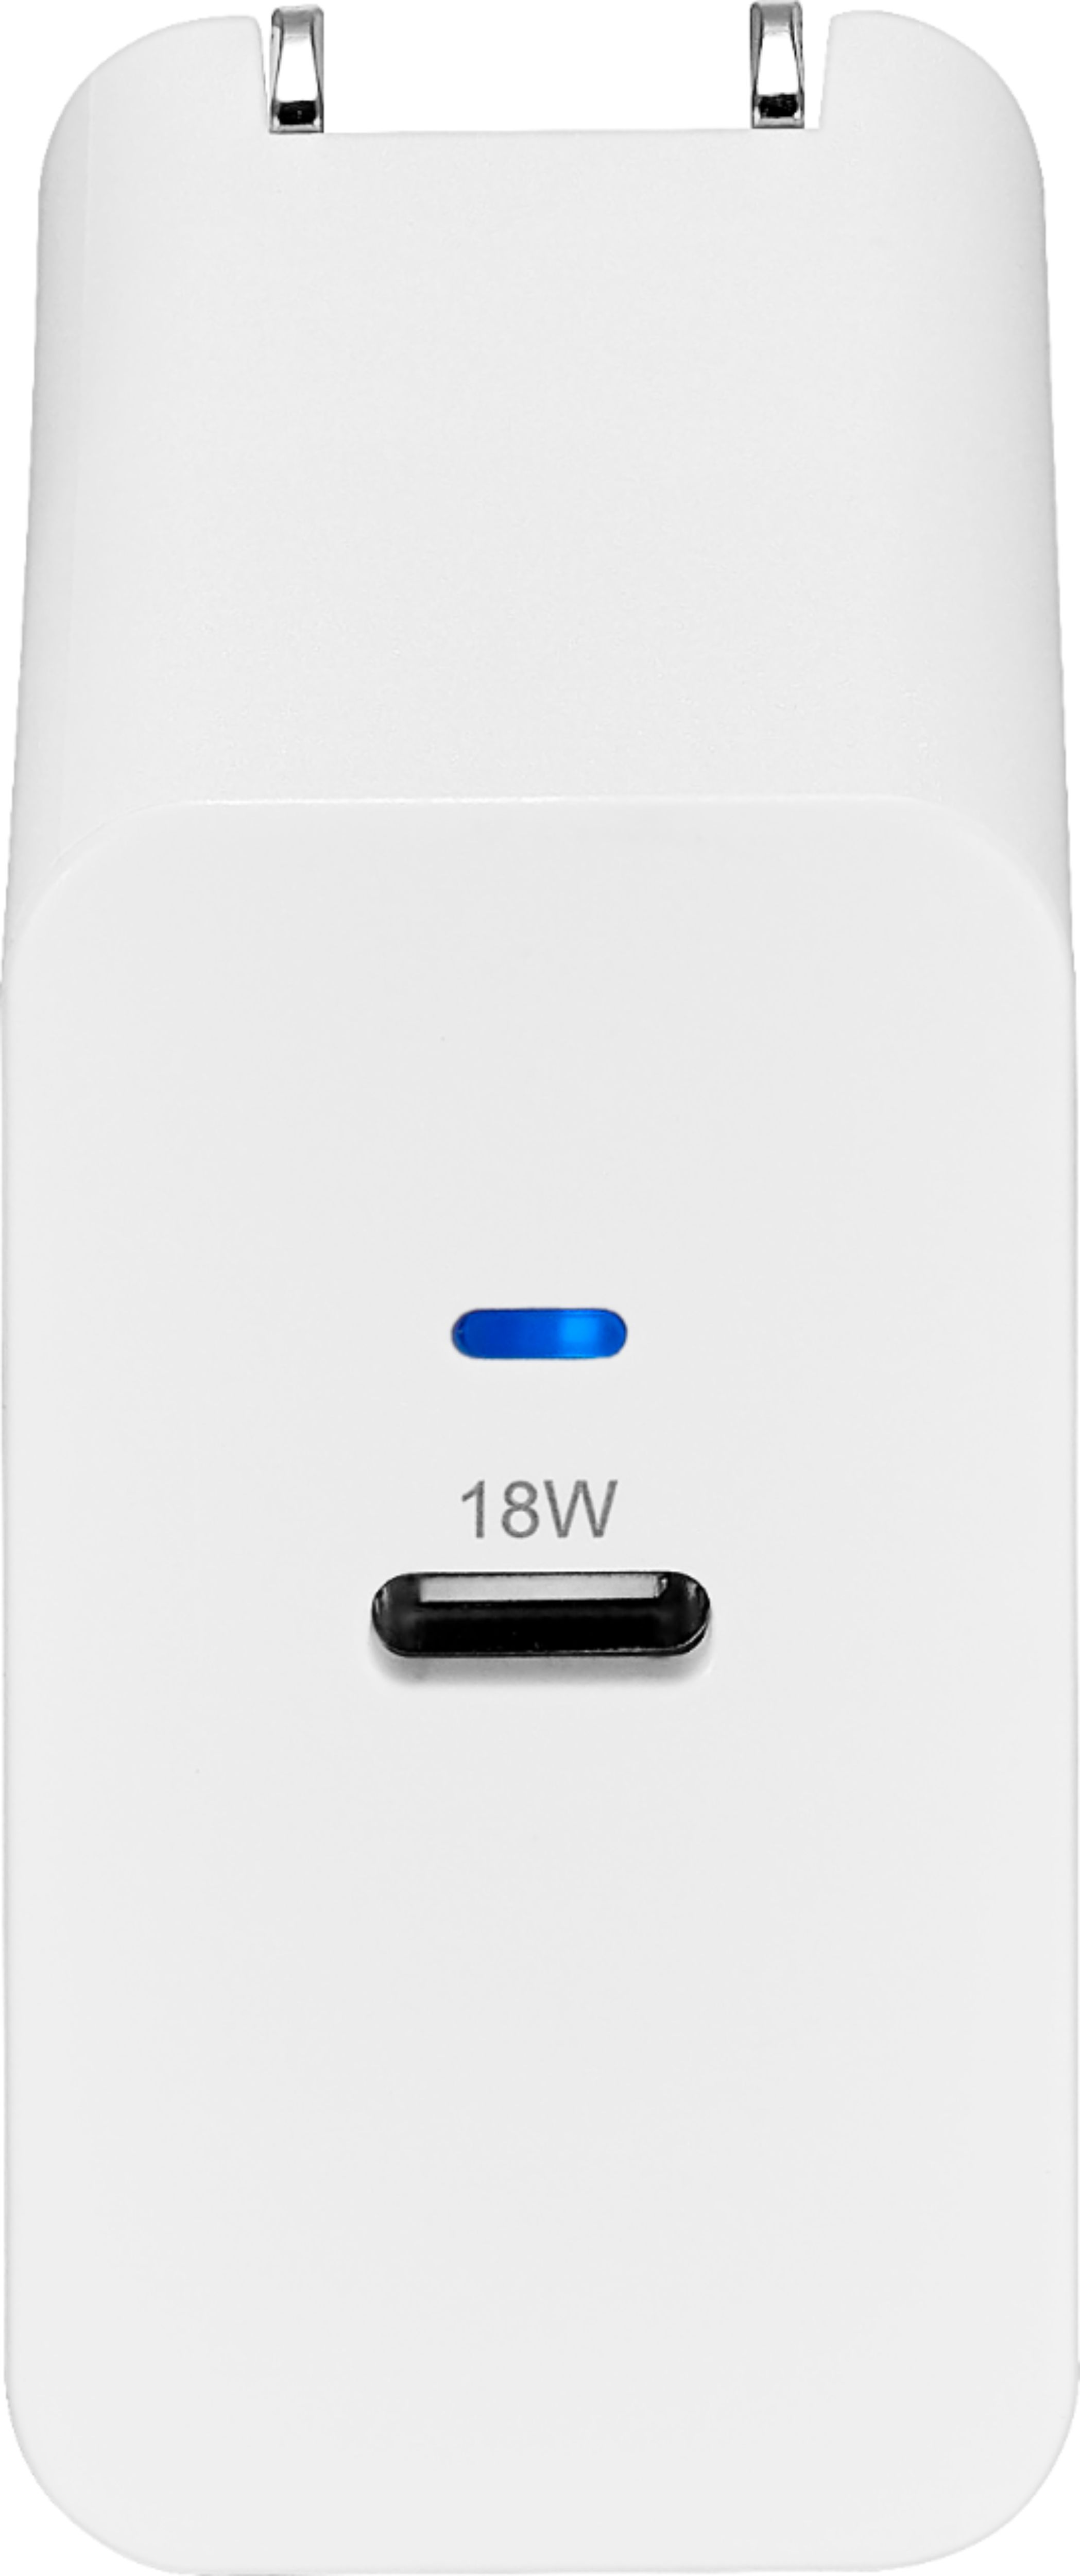 Insignia™ - 18 W USB-C Wall Charger with 4' Lightning Cable - White